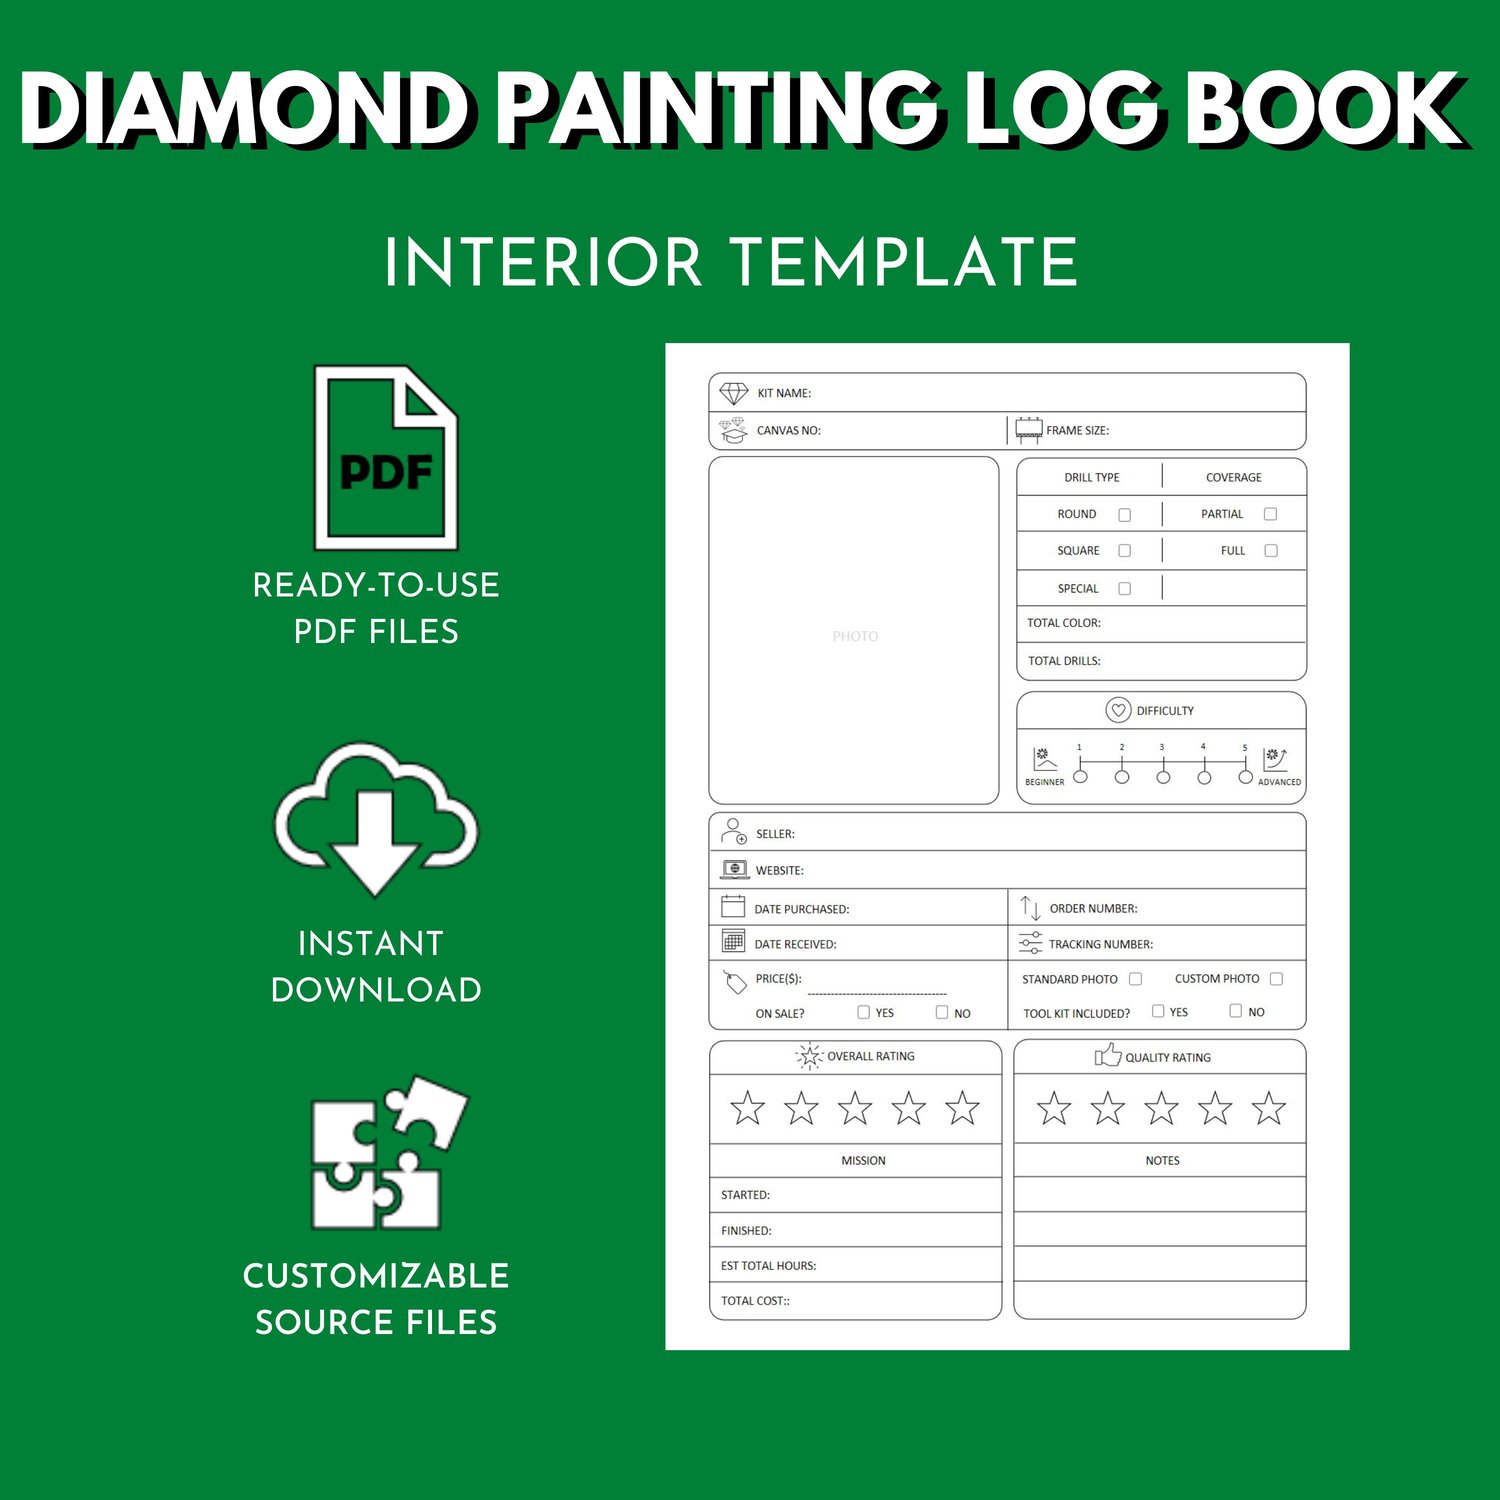 Diamond Painting Log Book  KDP Interior Template for Low-Content Book  - Payhip